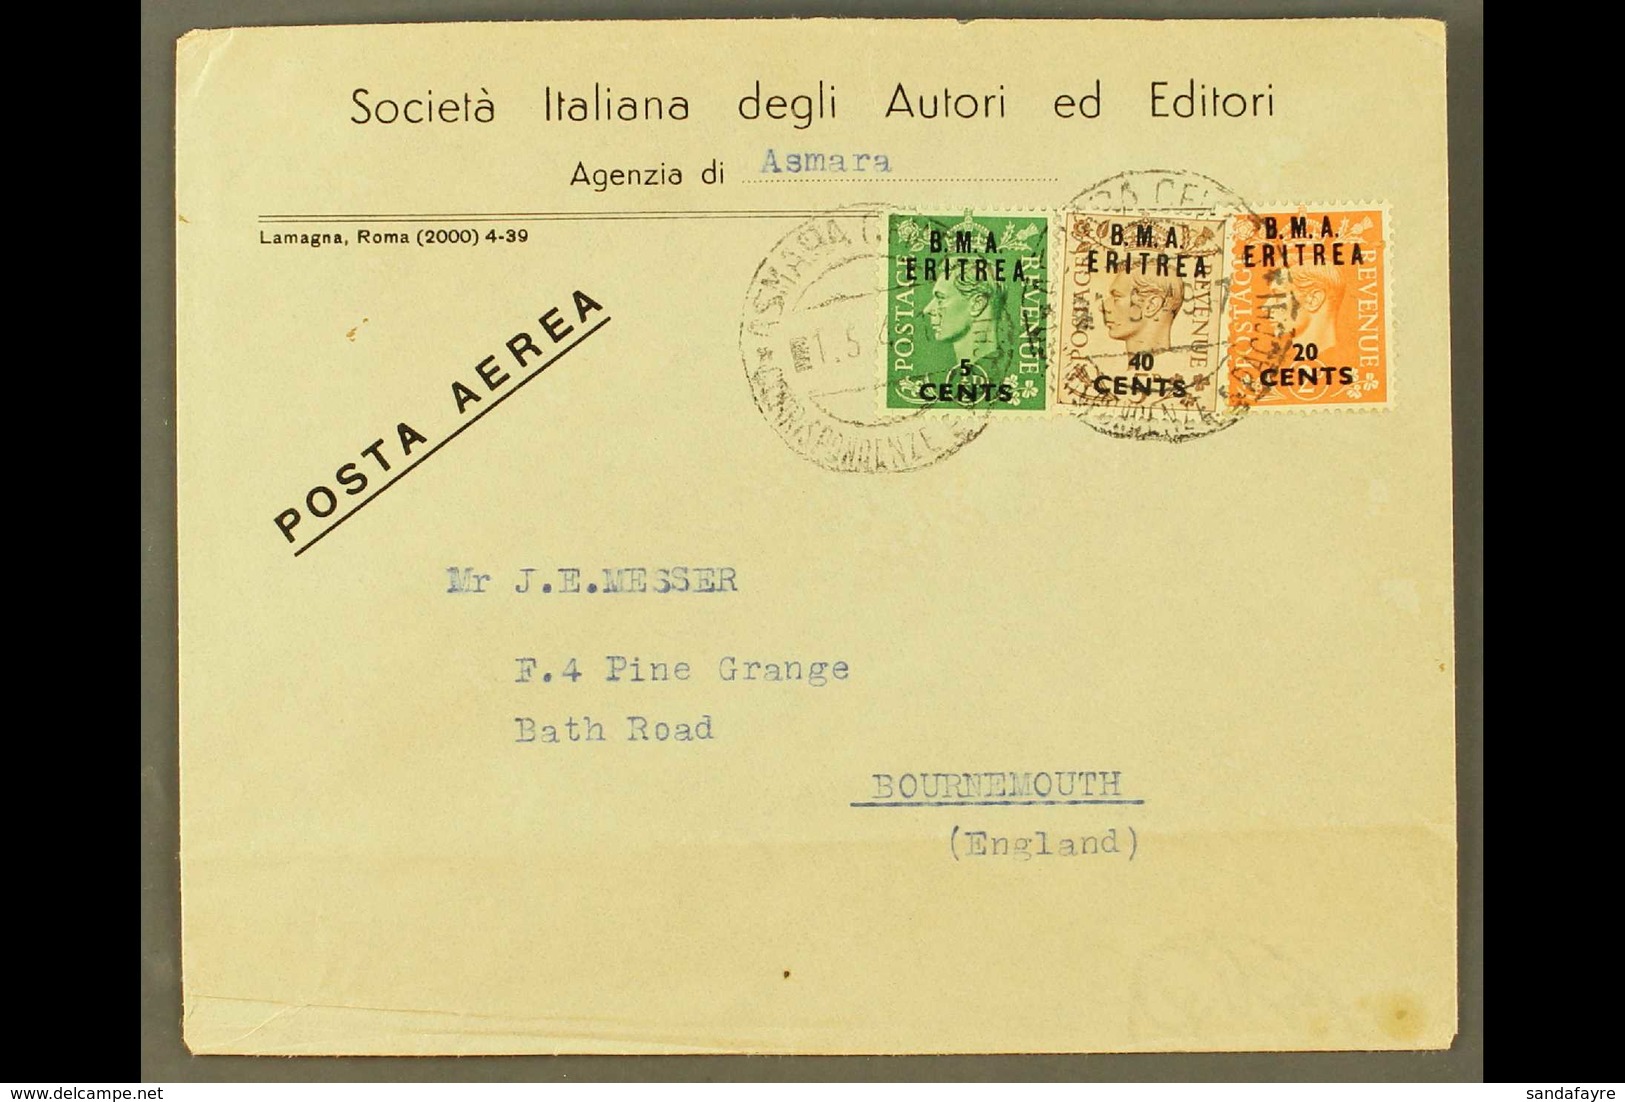 ERITREA 1949 (May) Printed Commercial Envelope To England, Bearing B.M.A. 5c On ½d, 20c On 2d And 40c On 5d, Tied Asmara - Italiaans Oost-Afrika